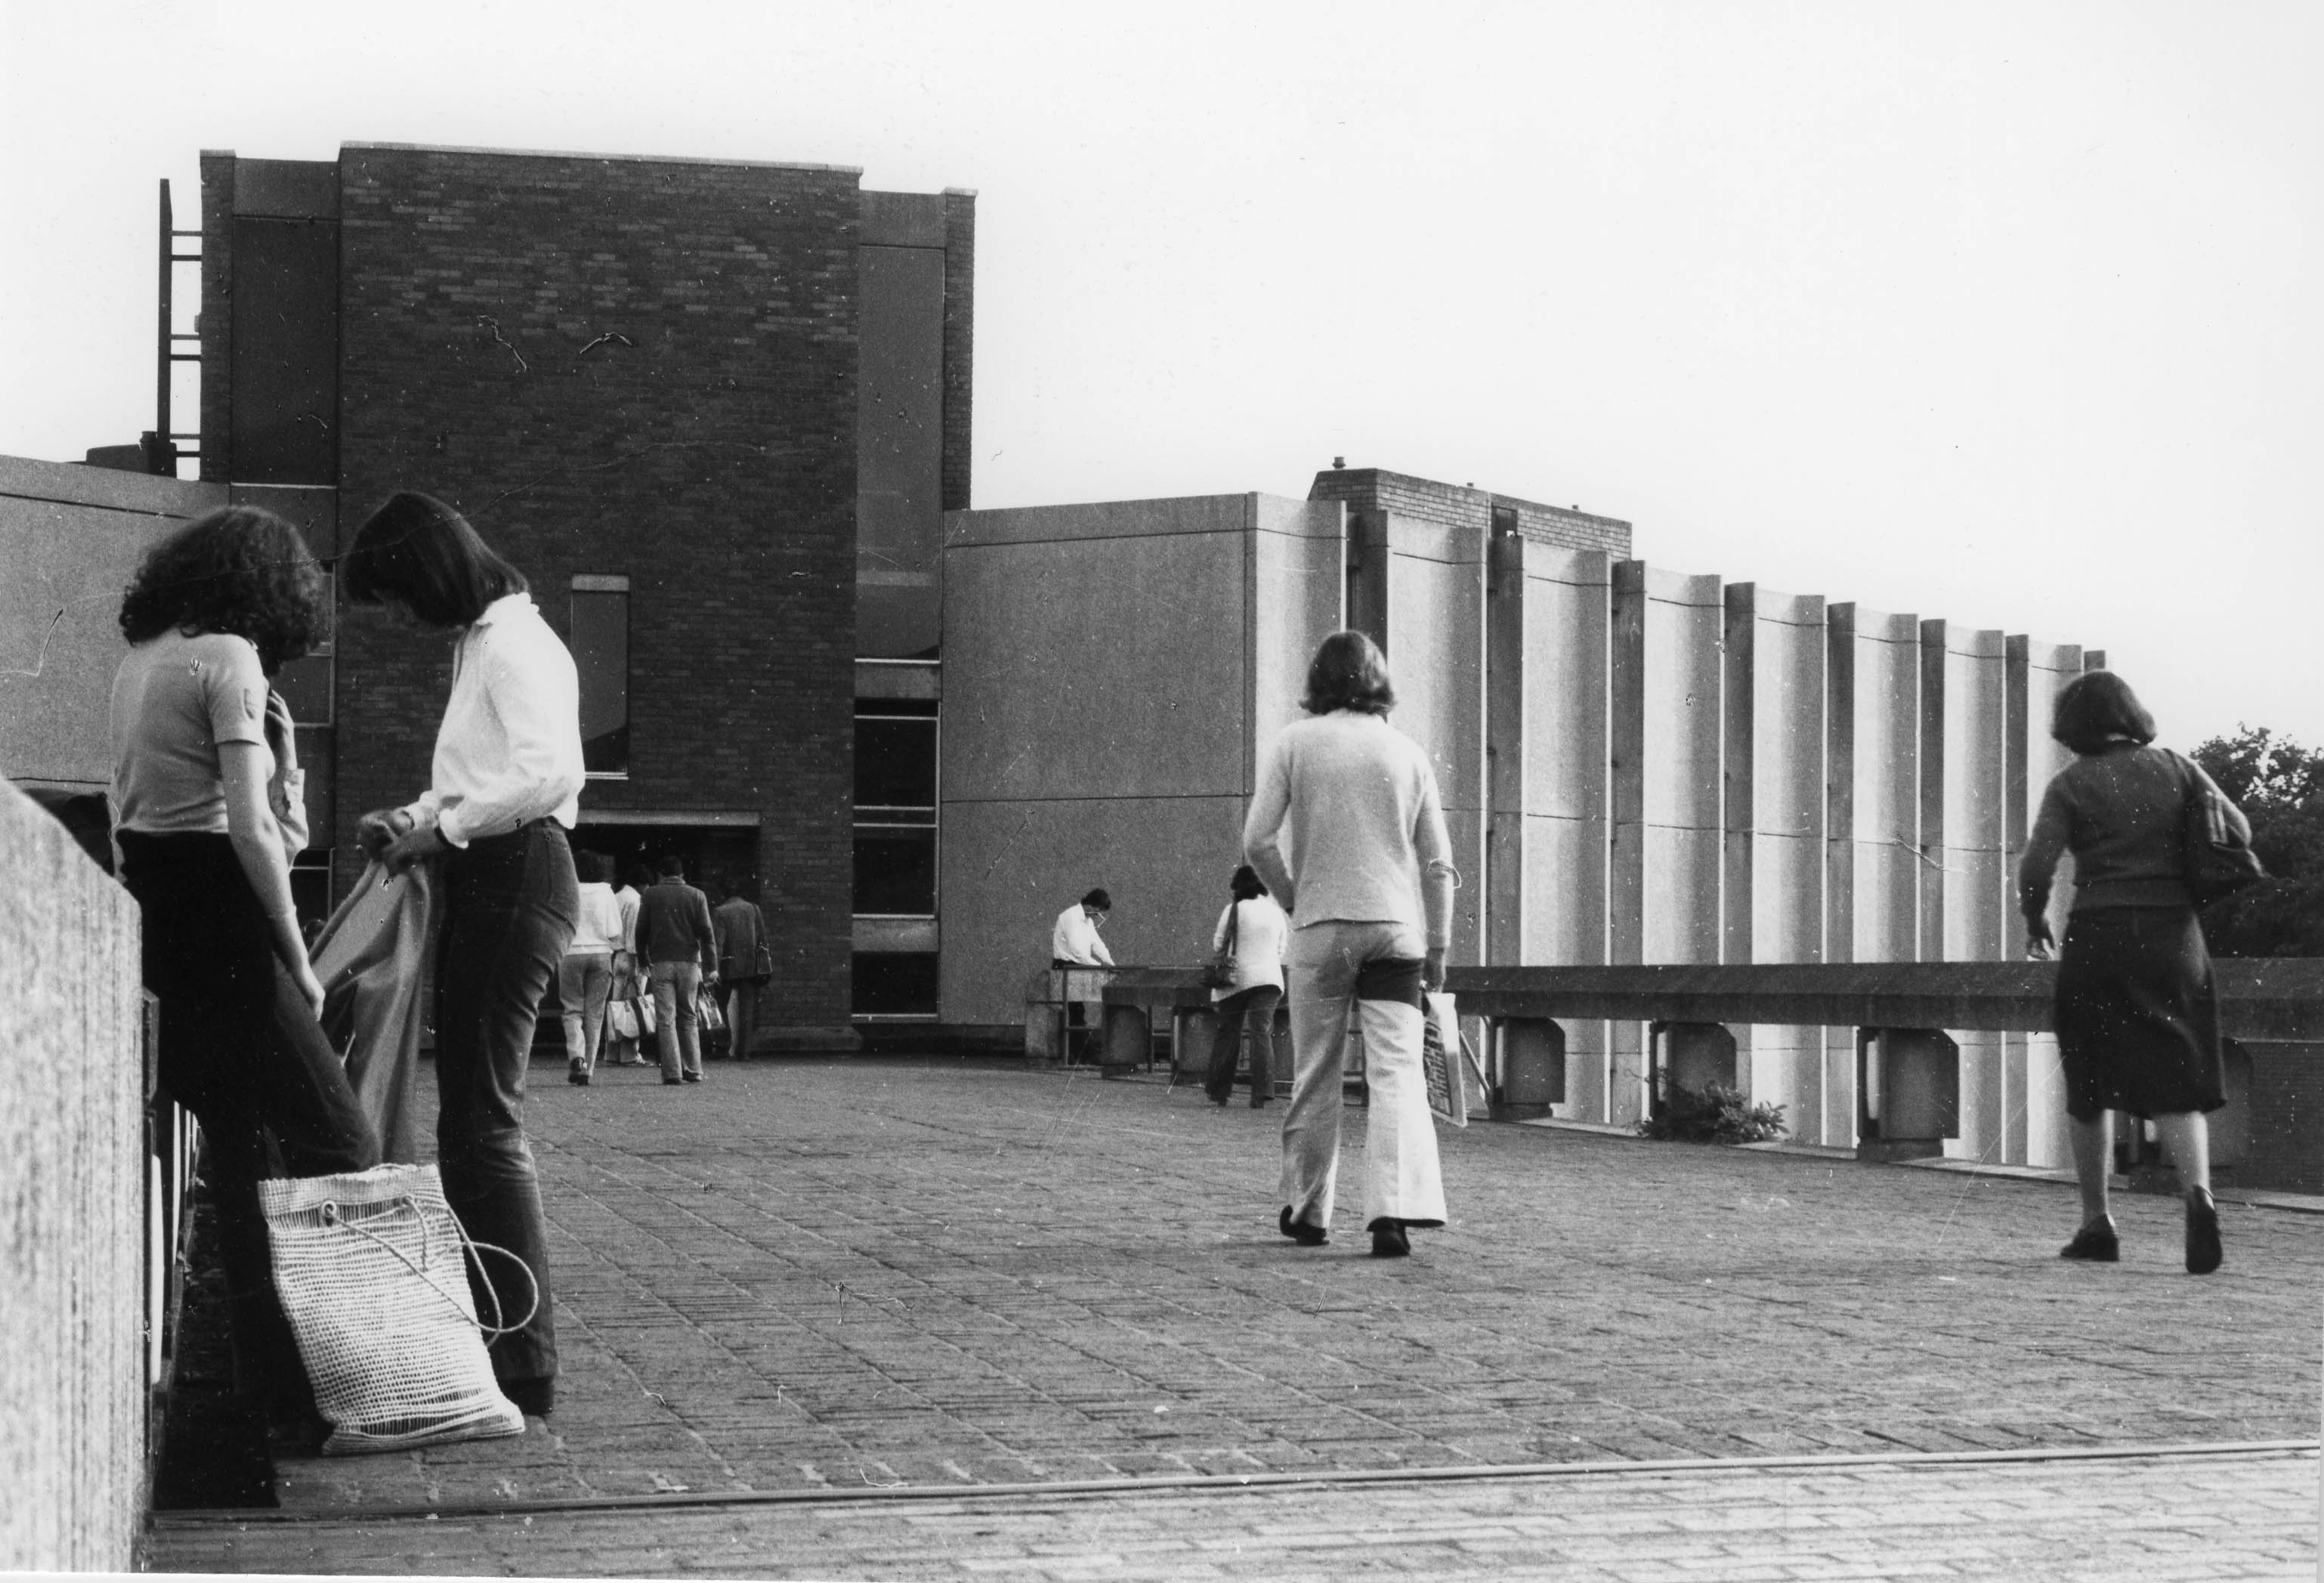 Black and white photograph of students on the causeway to the entrance of Eliot College, c1965. Two students are standing in a group on the left of the photo and two other students are walking towards the Eliot building in the background, with their backs to the camera